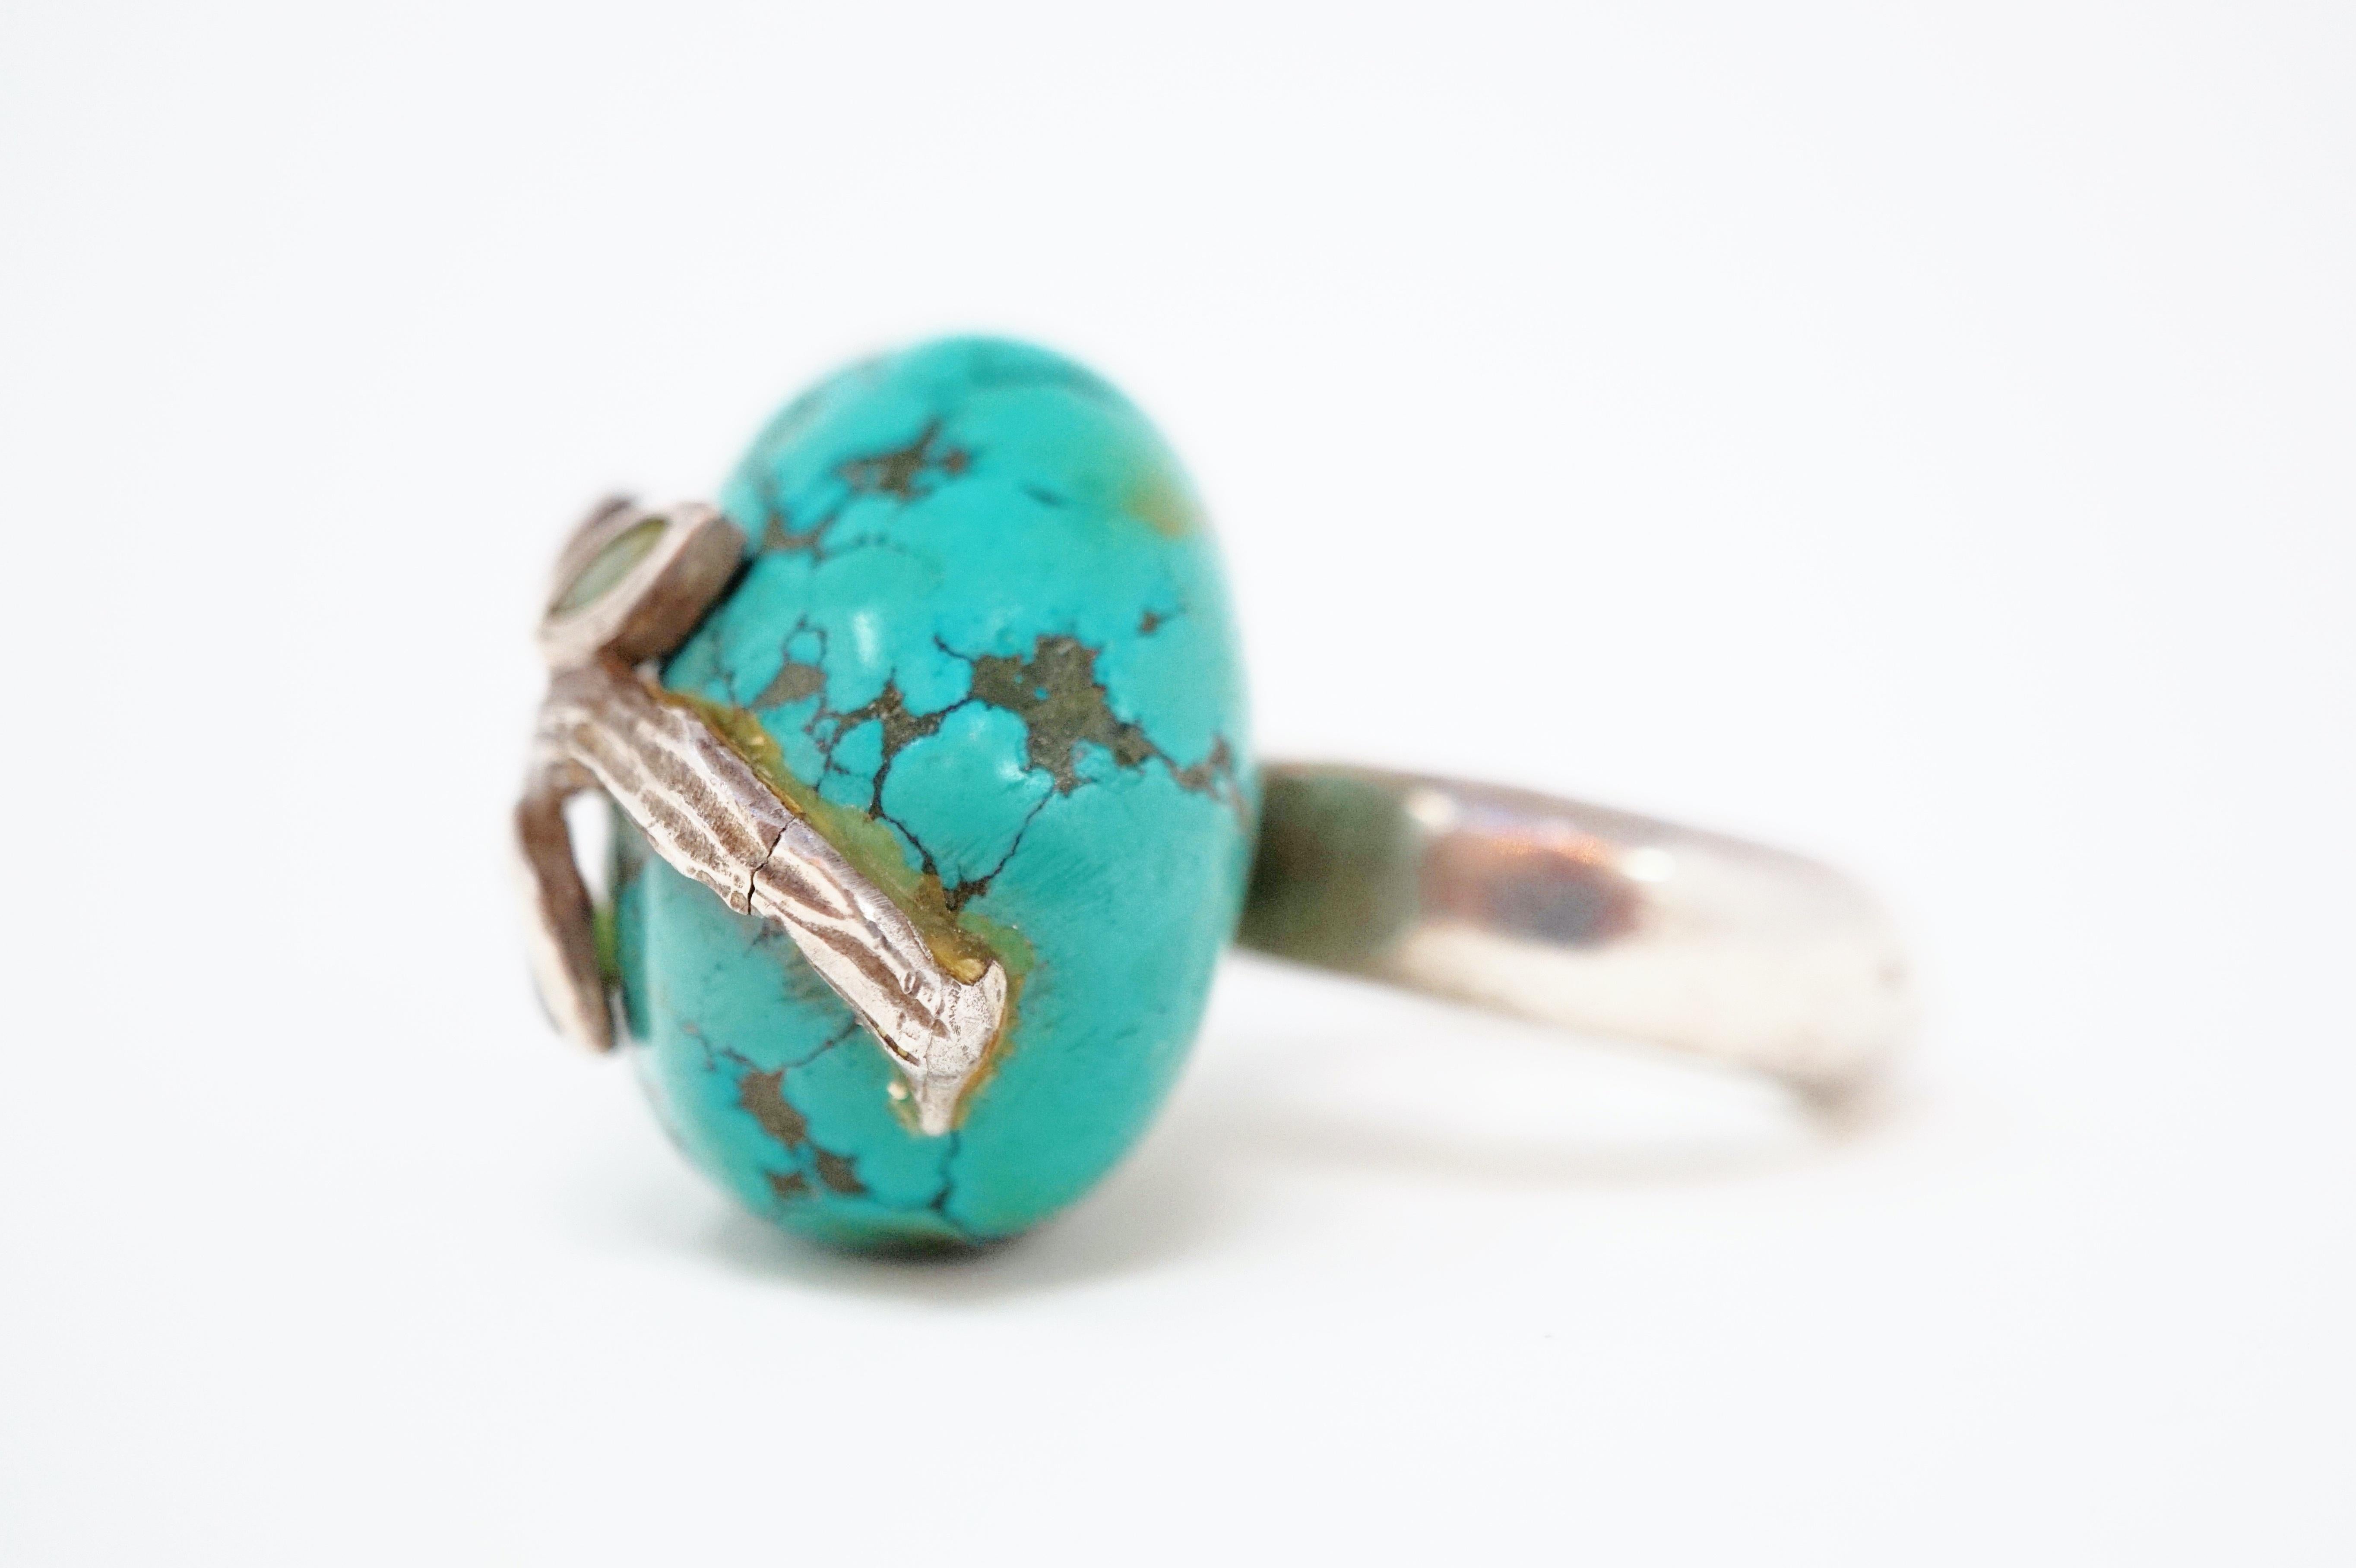 Modern Loulou de la Falaise Large Turquoise Cocktail Ring with Gemstone Accents